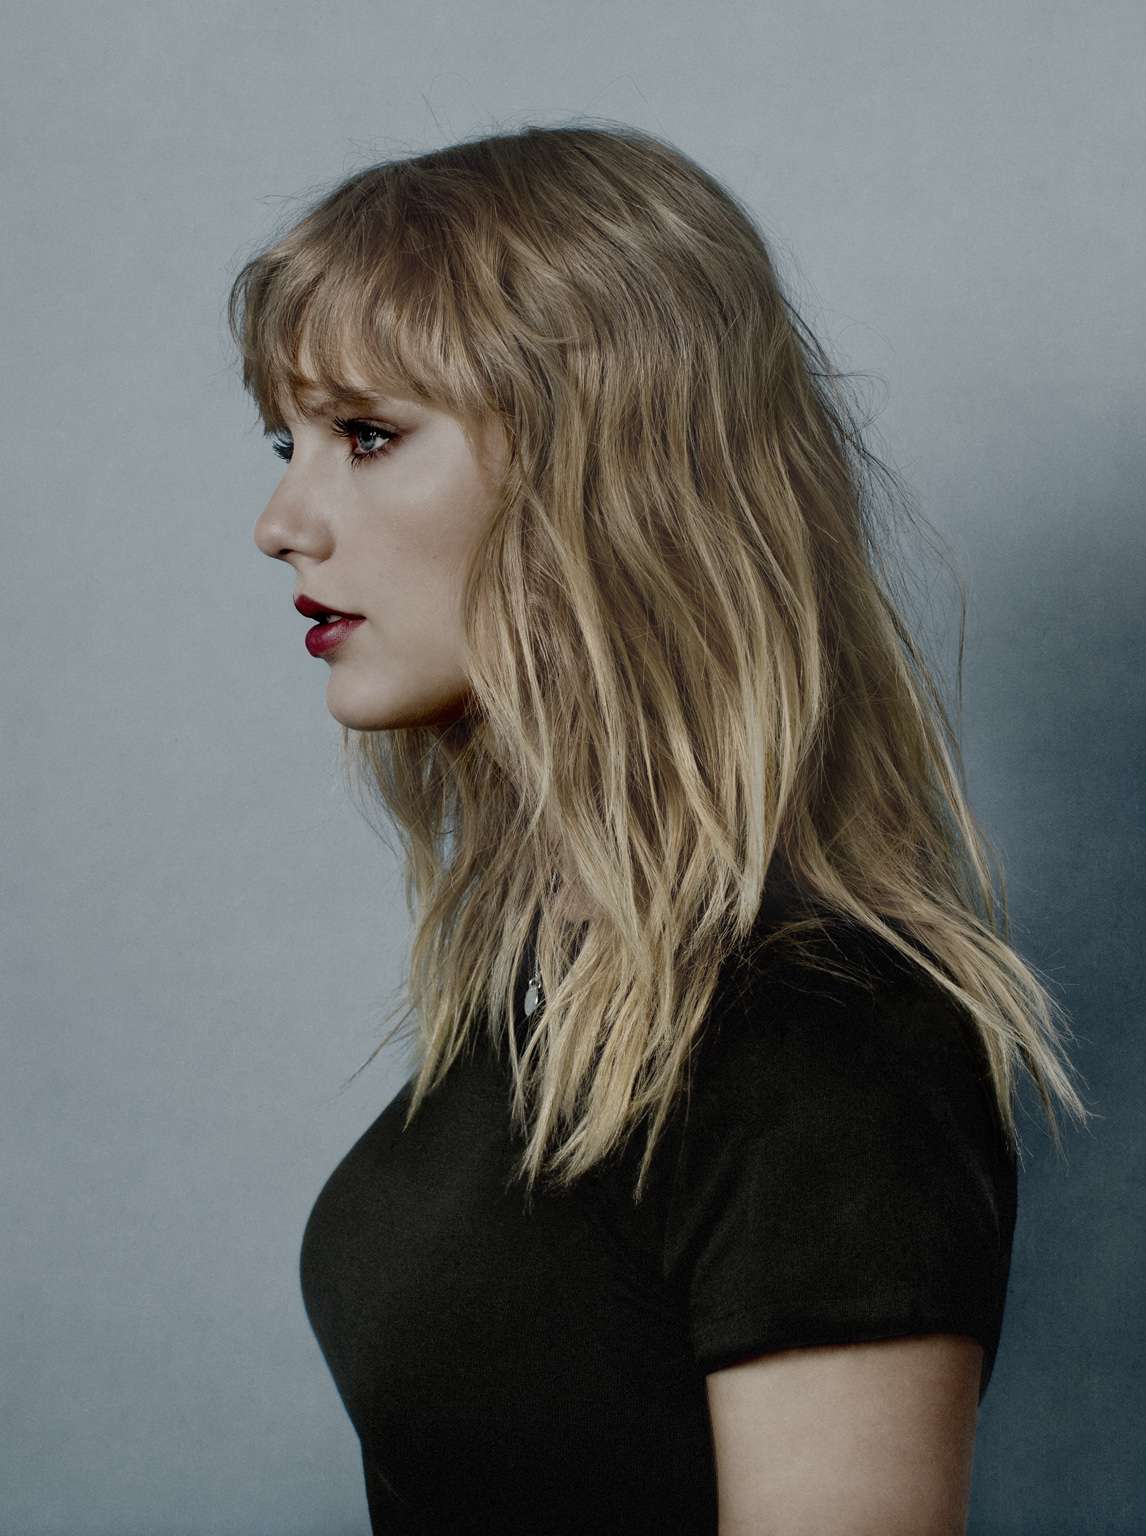 The Exact  Supplements That Taylor Swift Takes to Feel Less Anxious